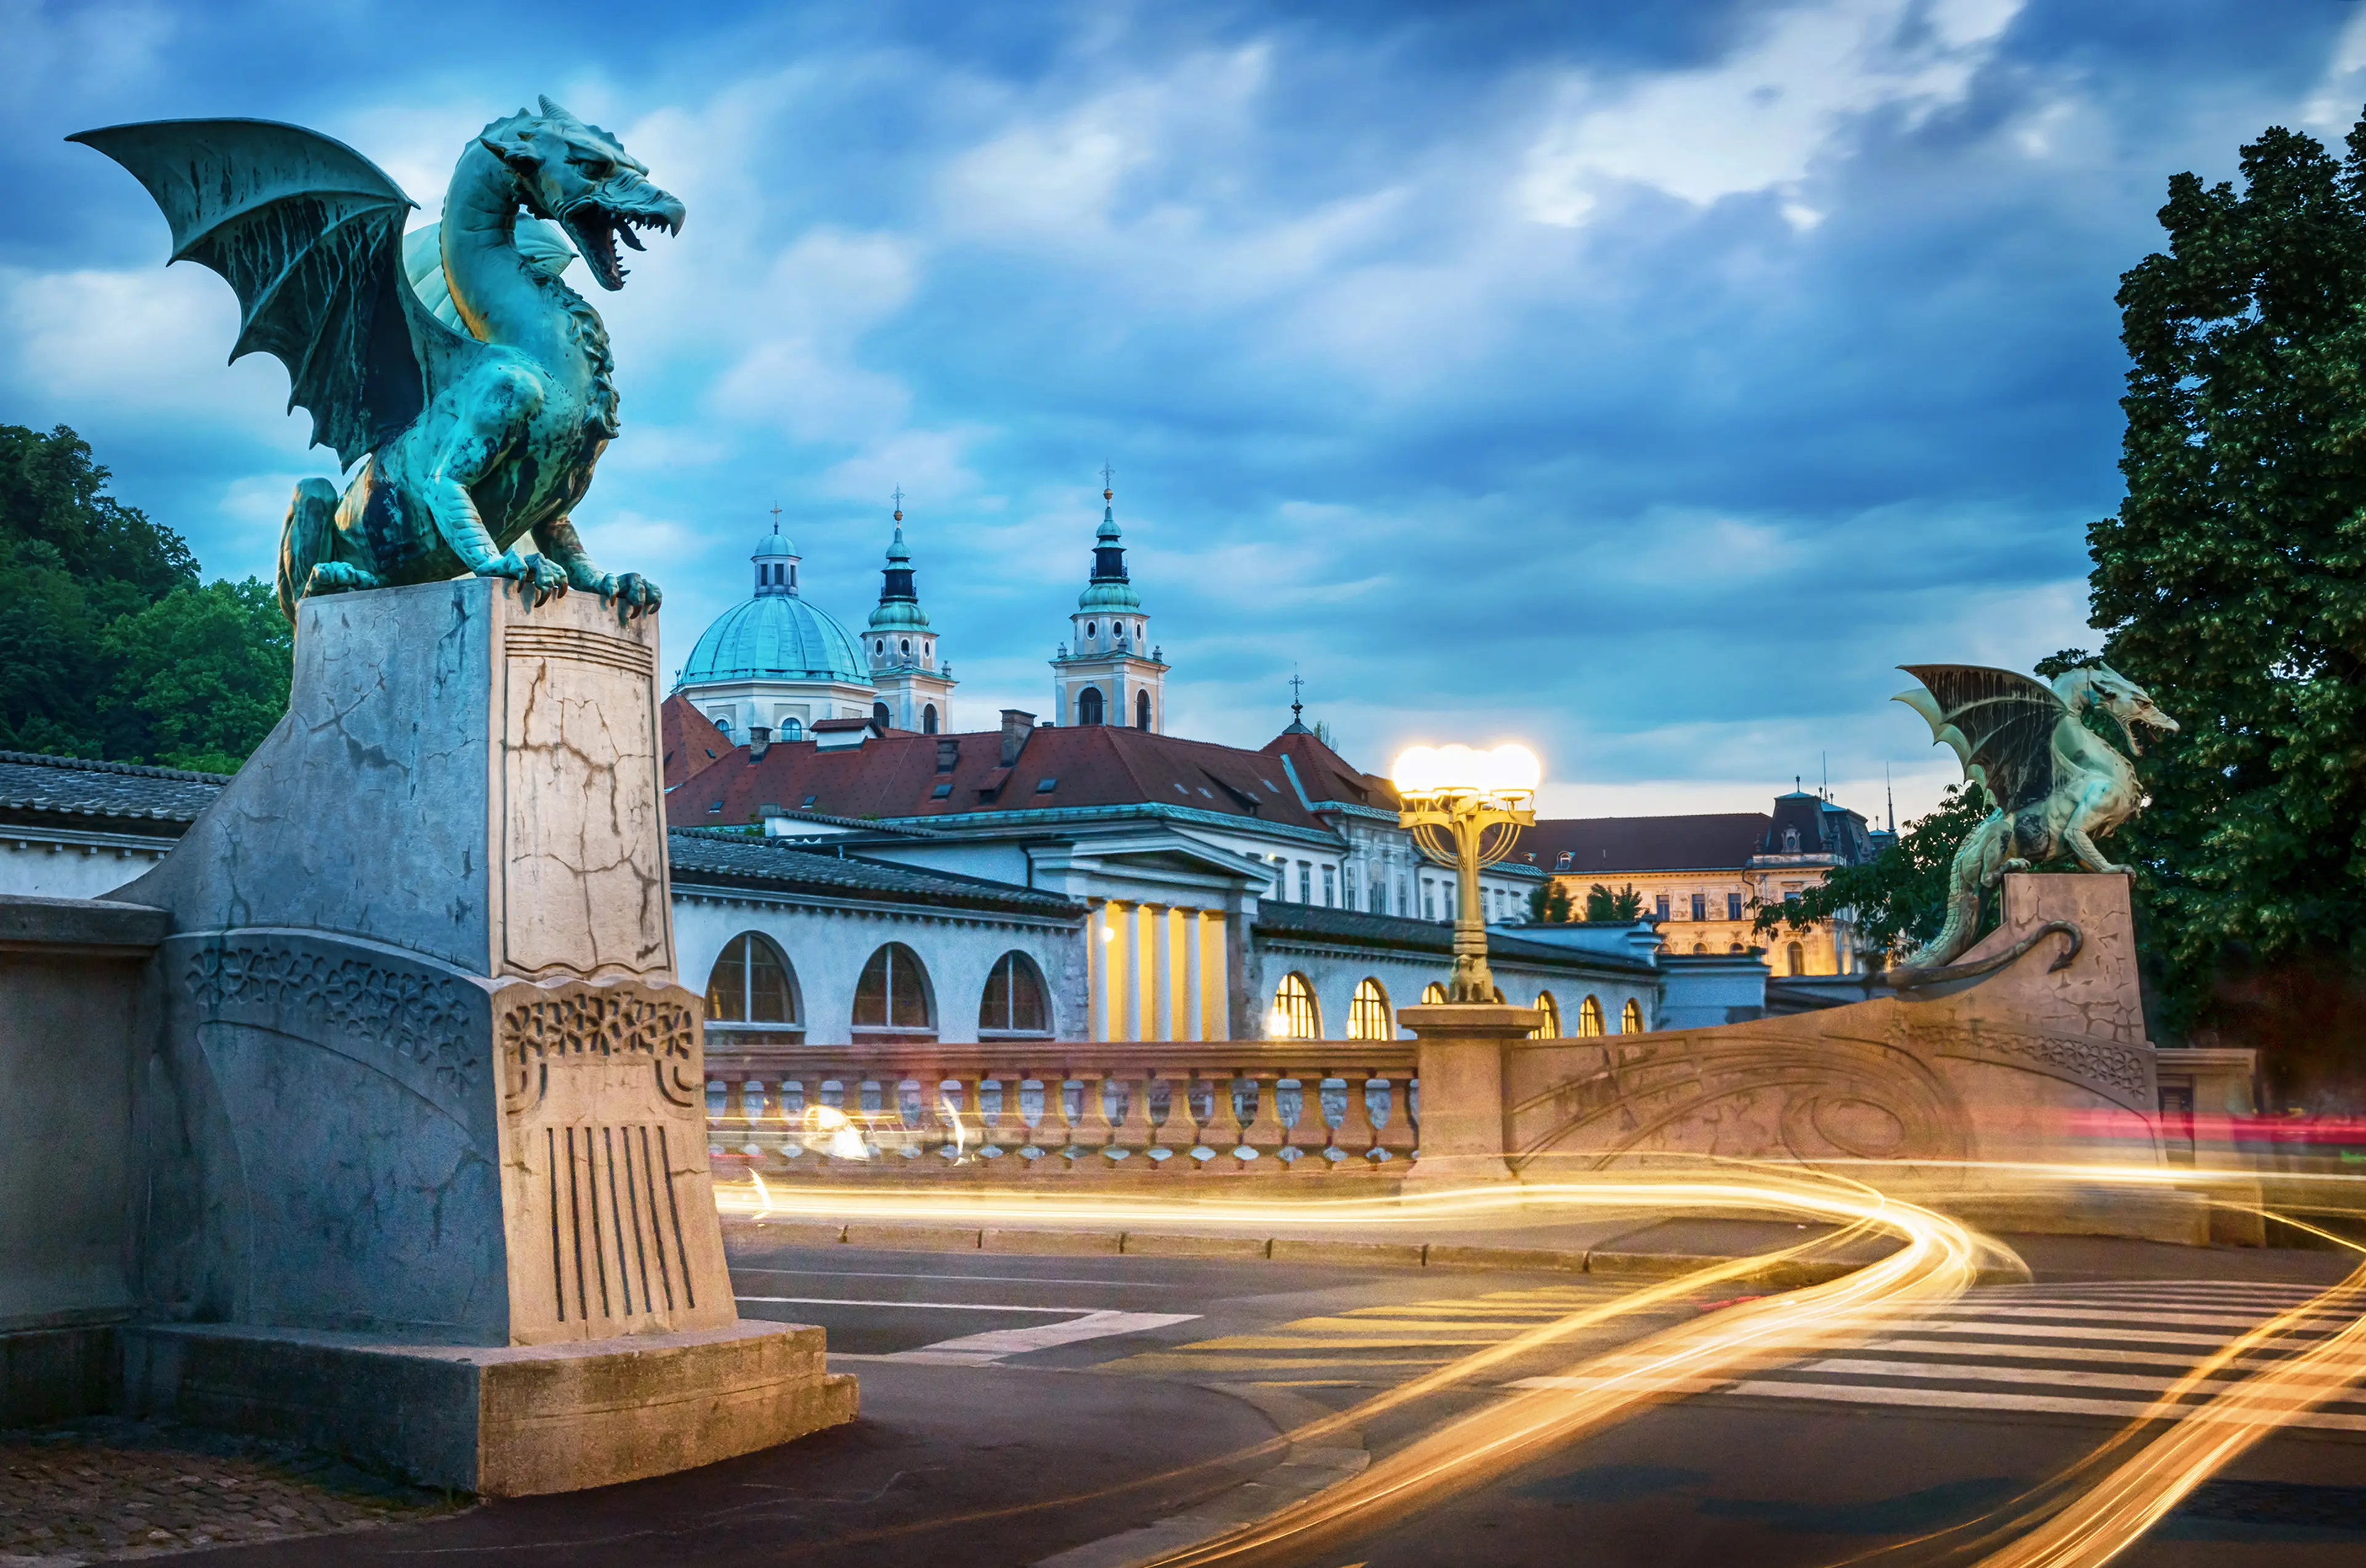 3-Day Family Adventure and Sightseeing in Ljubljana, Slovenia